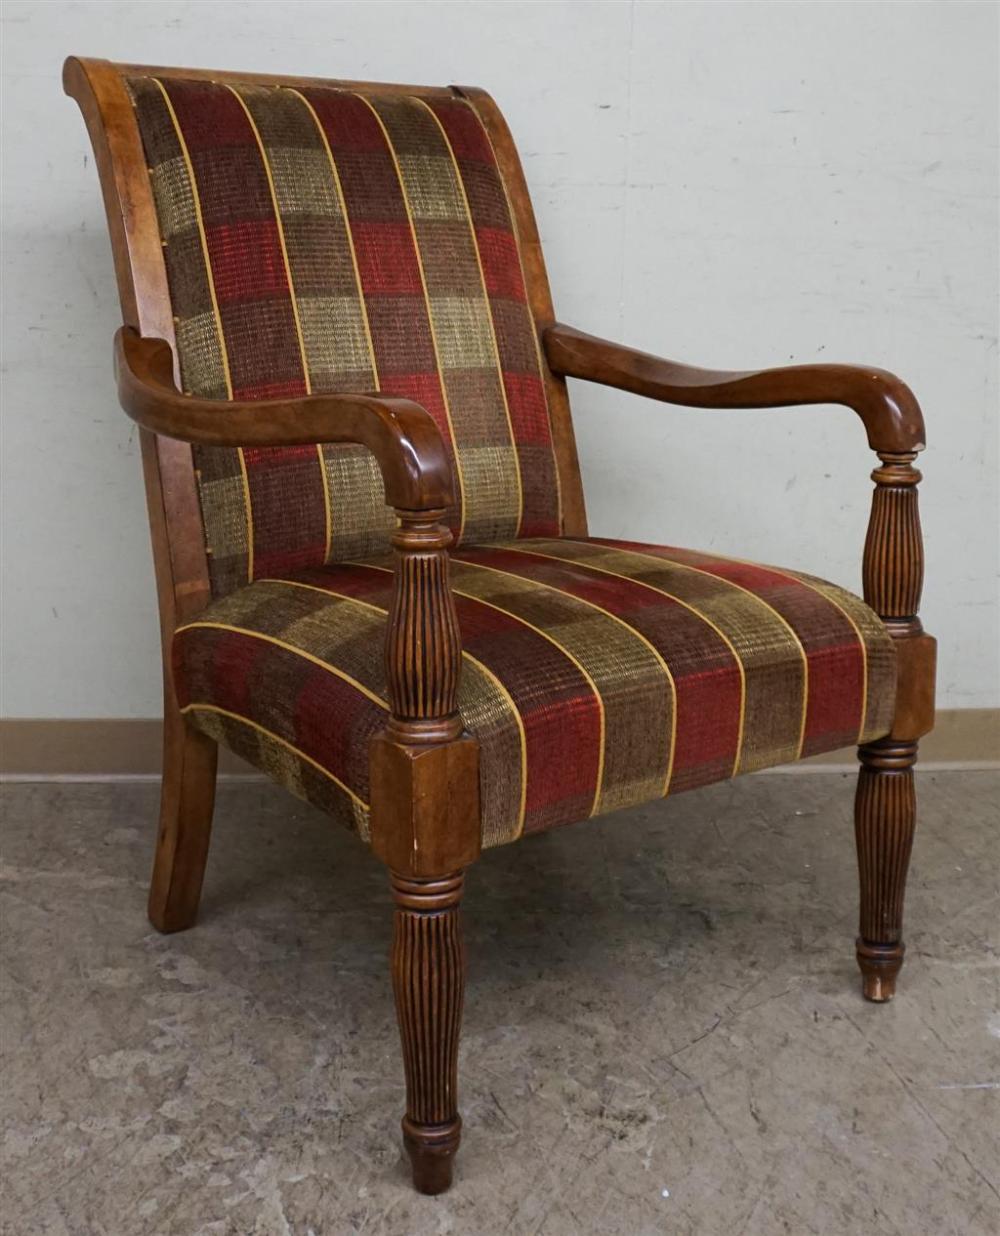 FAIRFIELD CHAIR CO. FRUITWOOD UPHOLSTERED